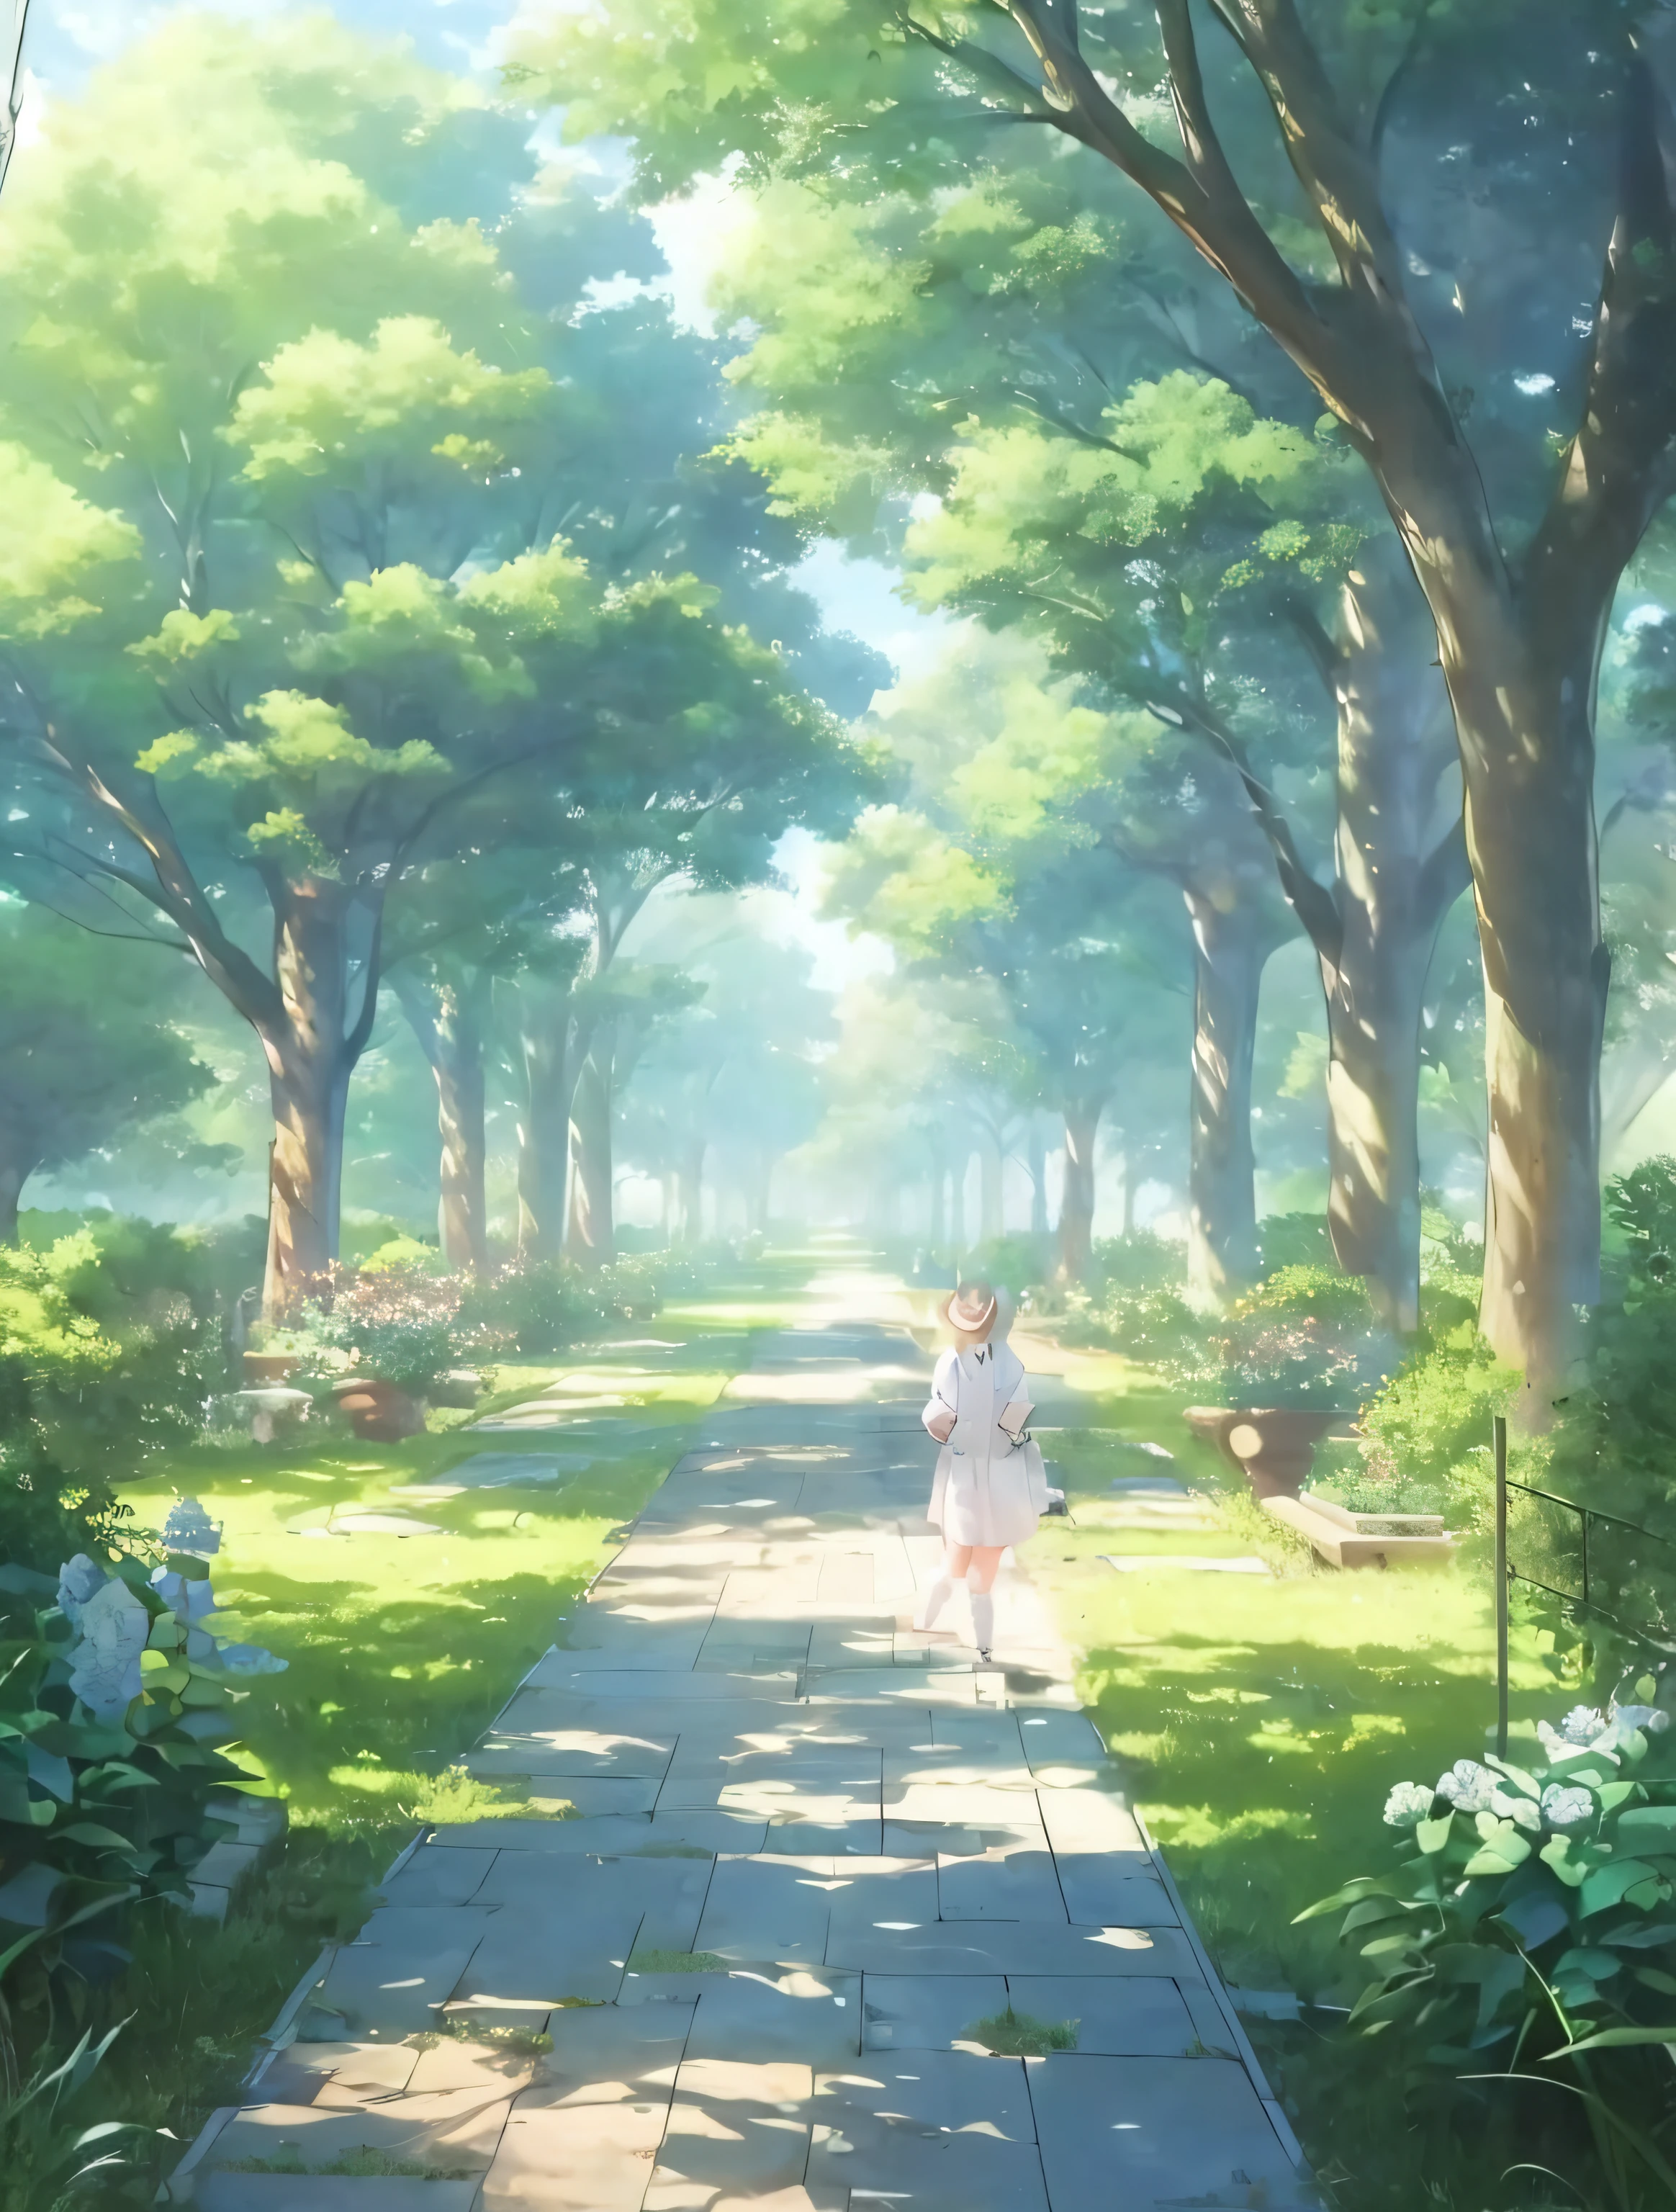 Anime Cameltoe Porn - Anime girl walking down a path in a park with trees - SeaArt AI